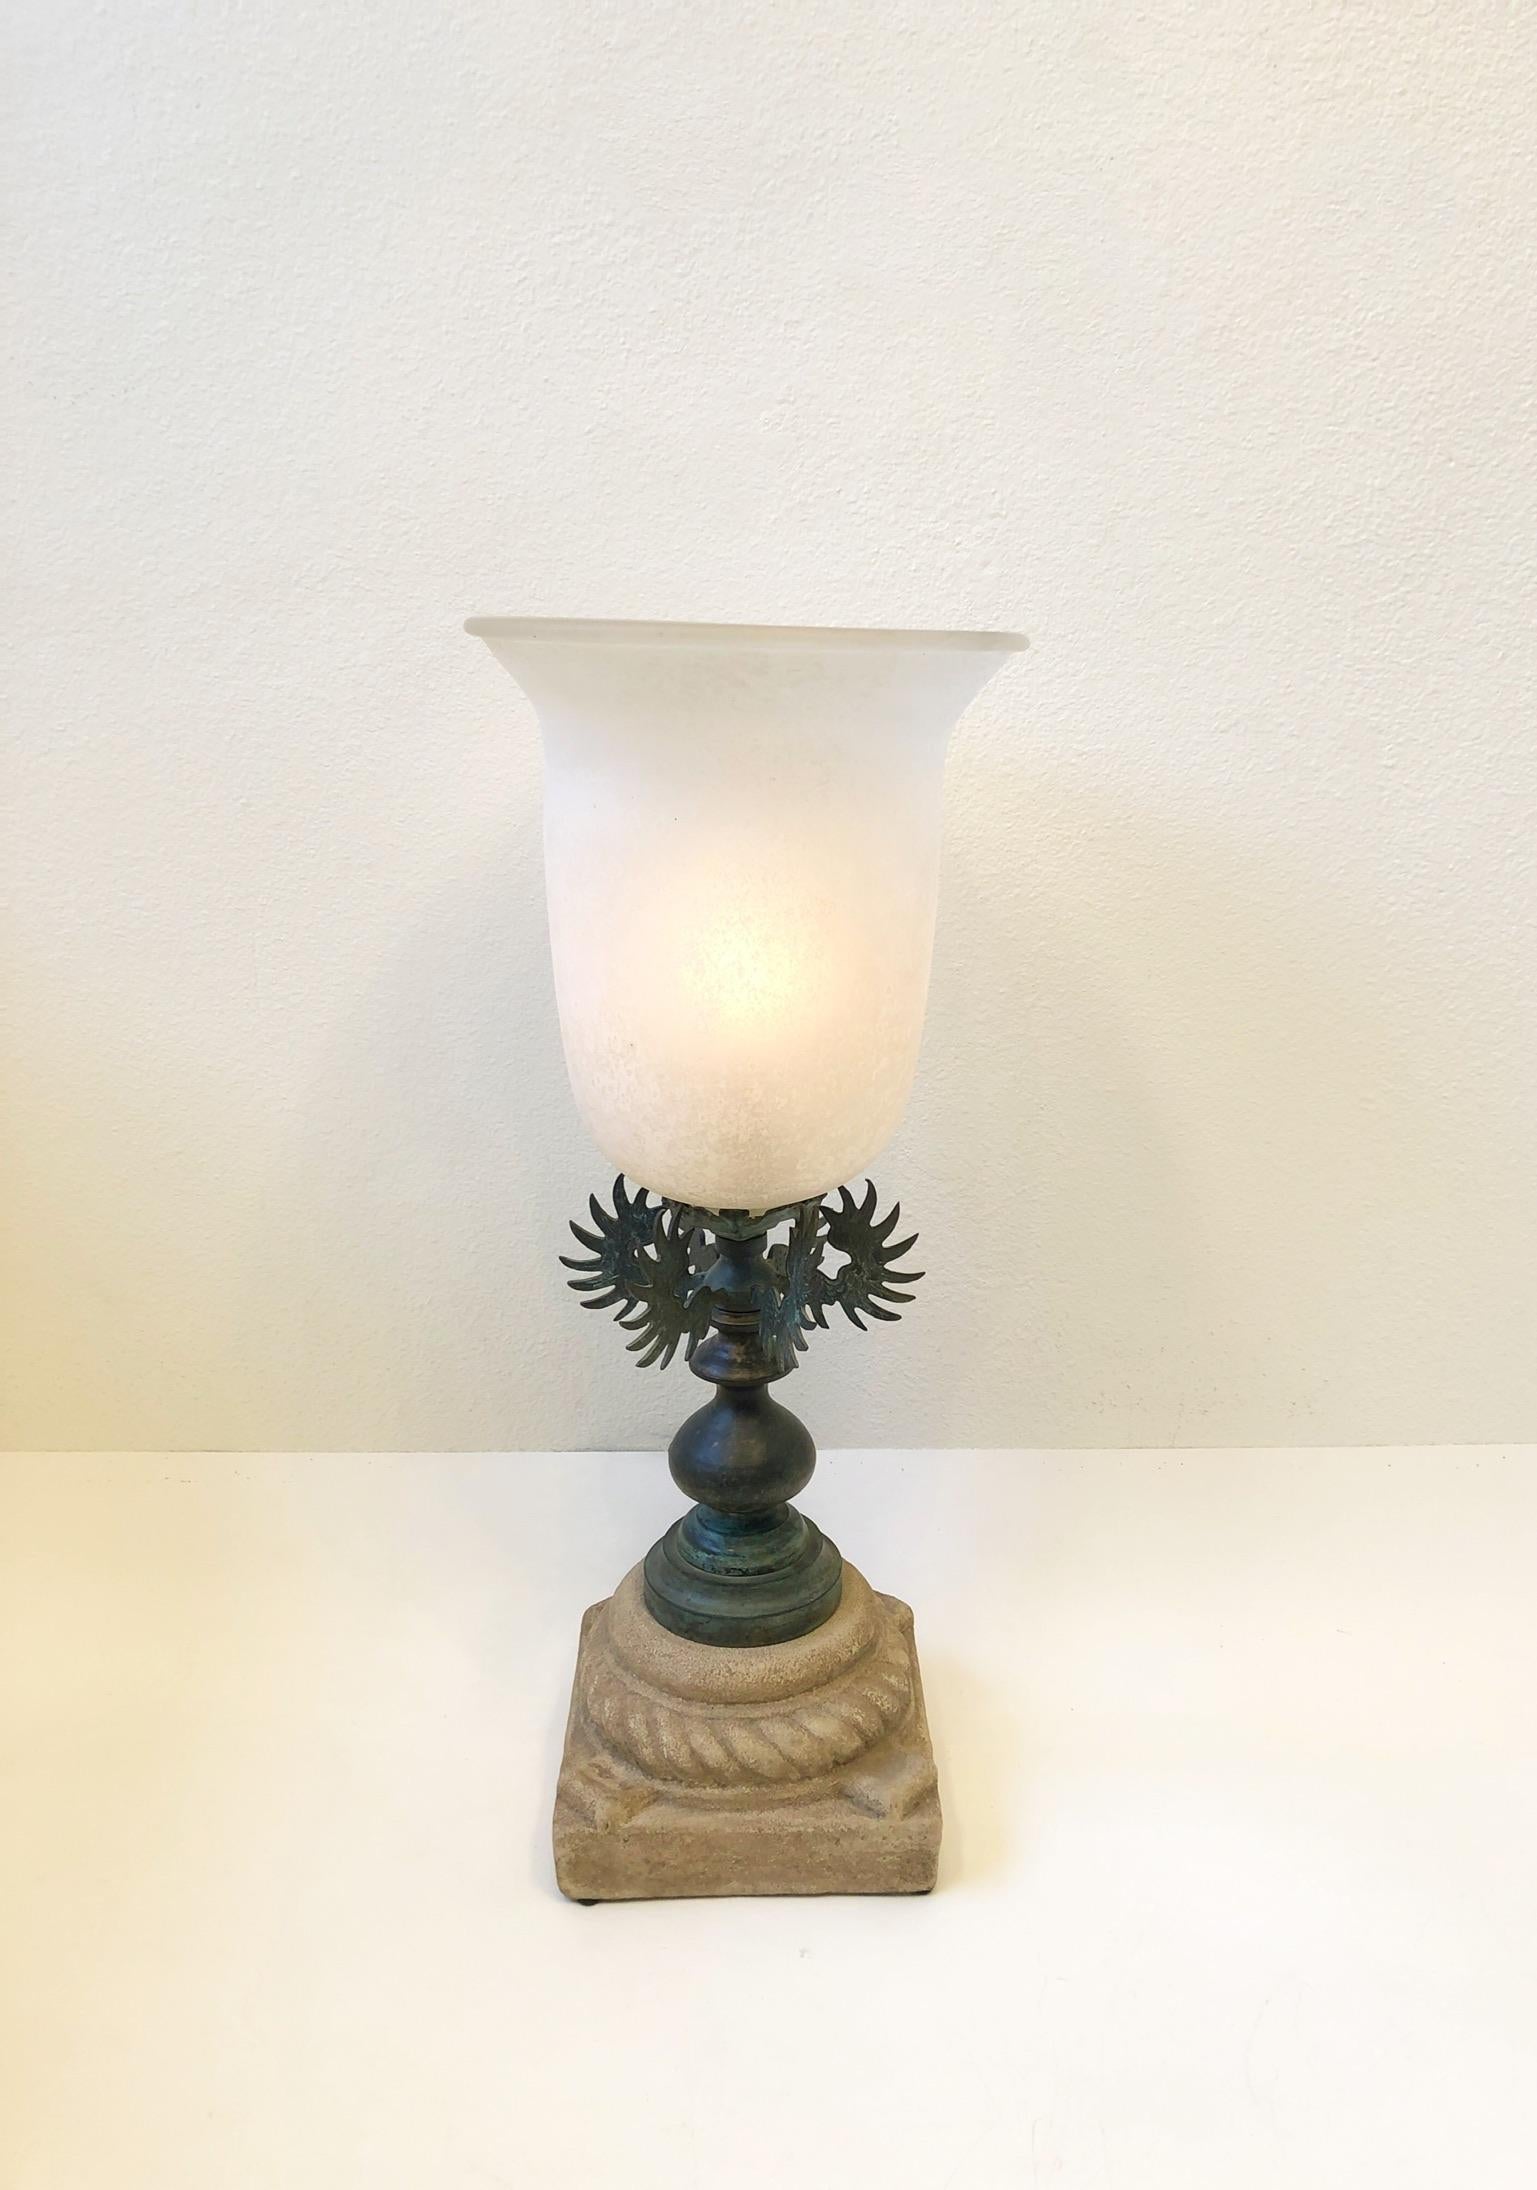 1980’s large white scavo Murano glass and bronze on a plaster base table lamp. 
It takes one small candelabra 75w max bulb. Newly rewired with inline dimmer.
Measurements: 30.63” high, 12.75” diameter 
Base- 9.75”wide, 9.75” deep.